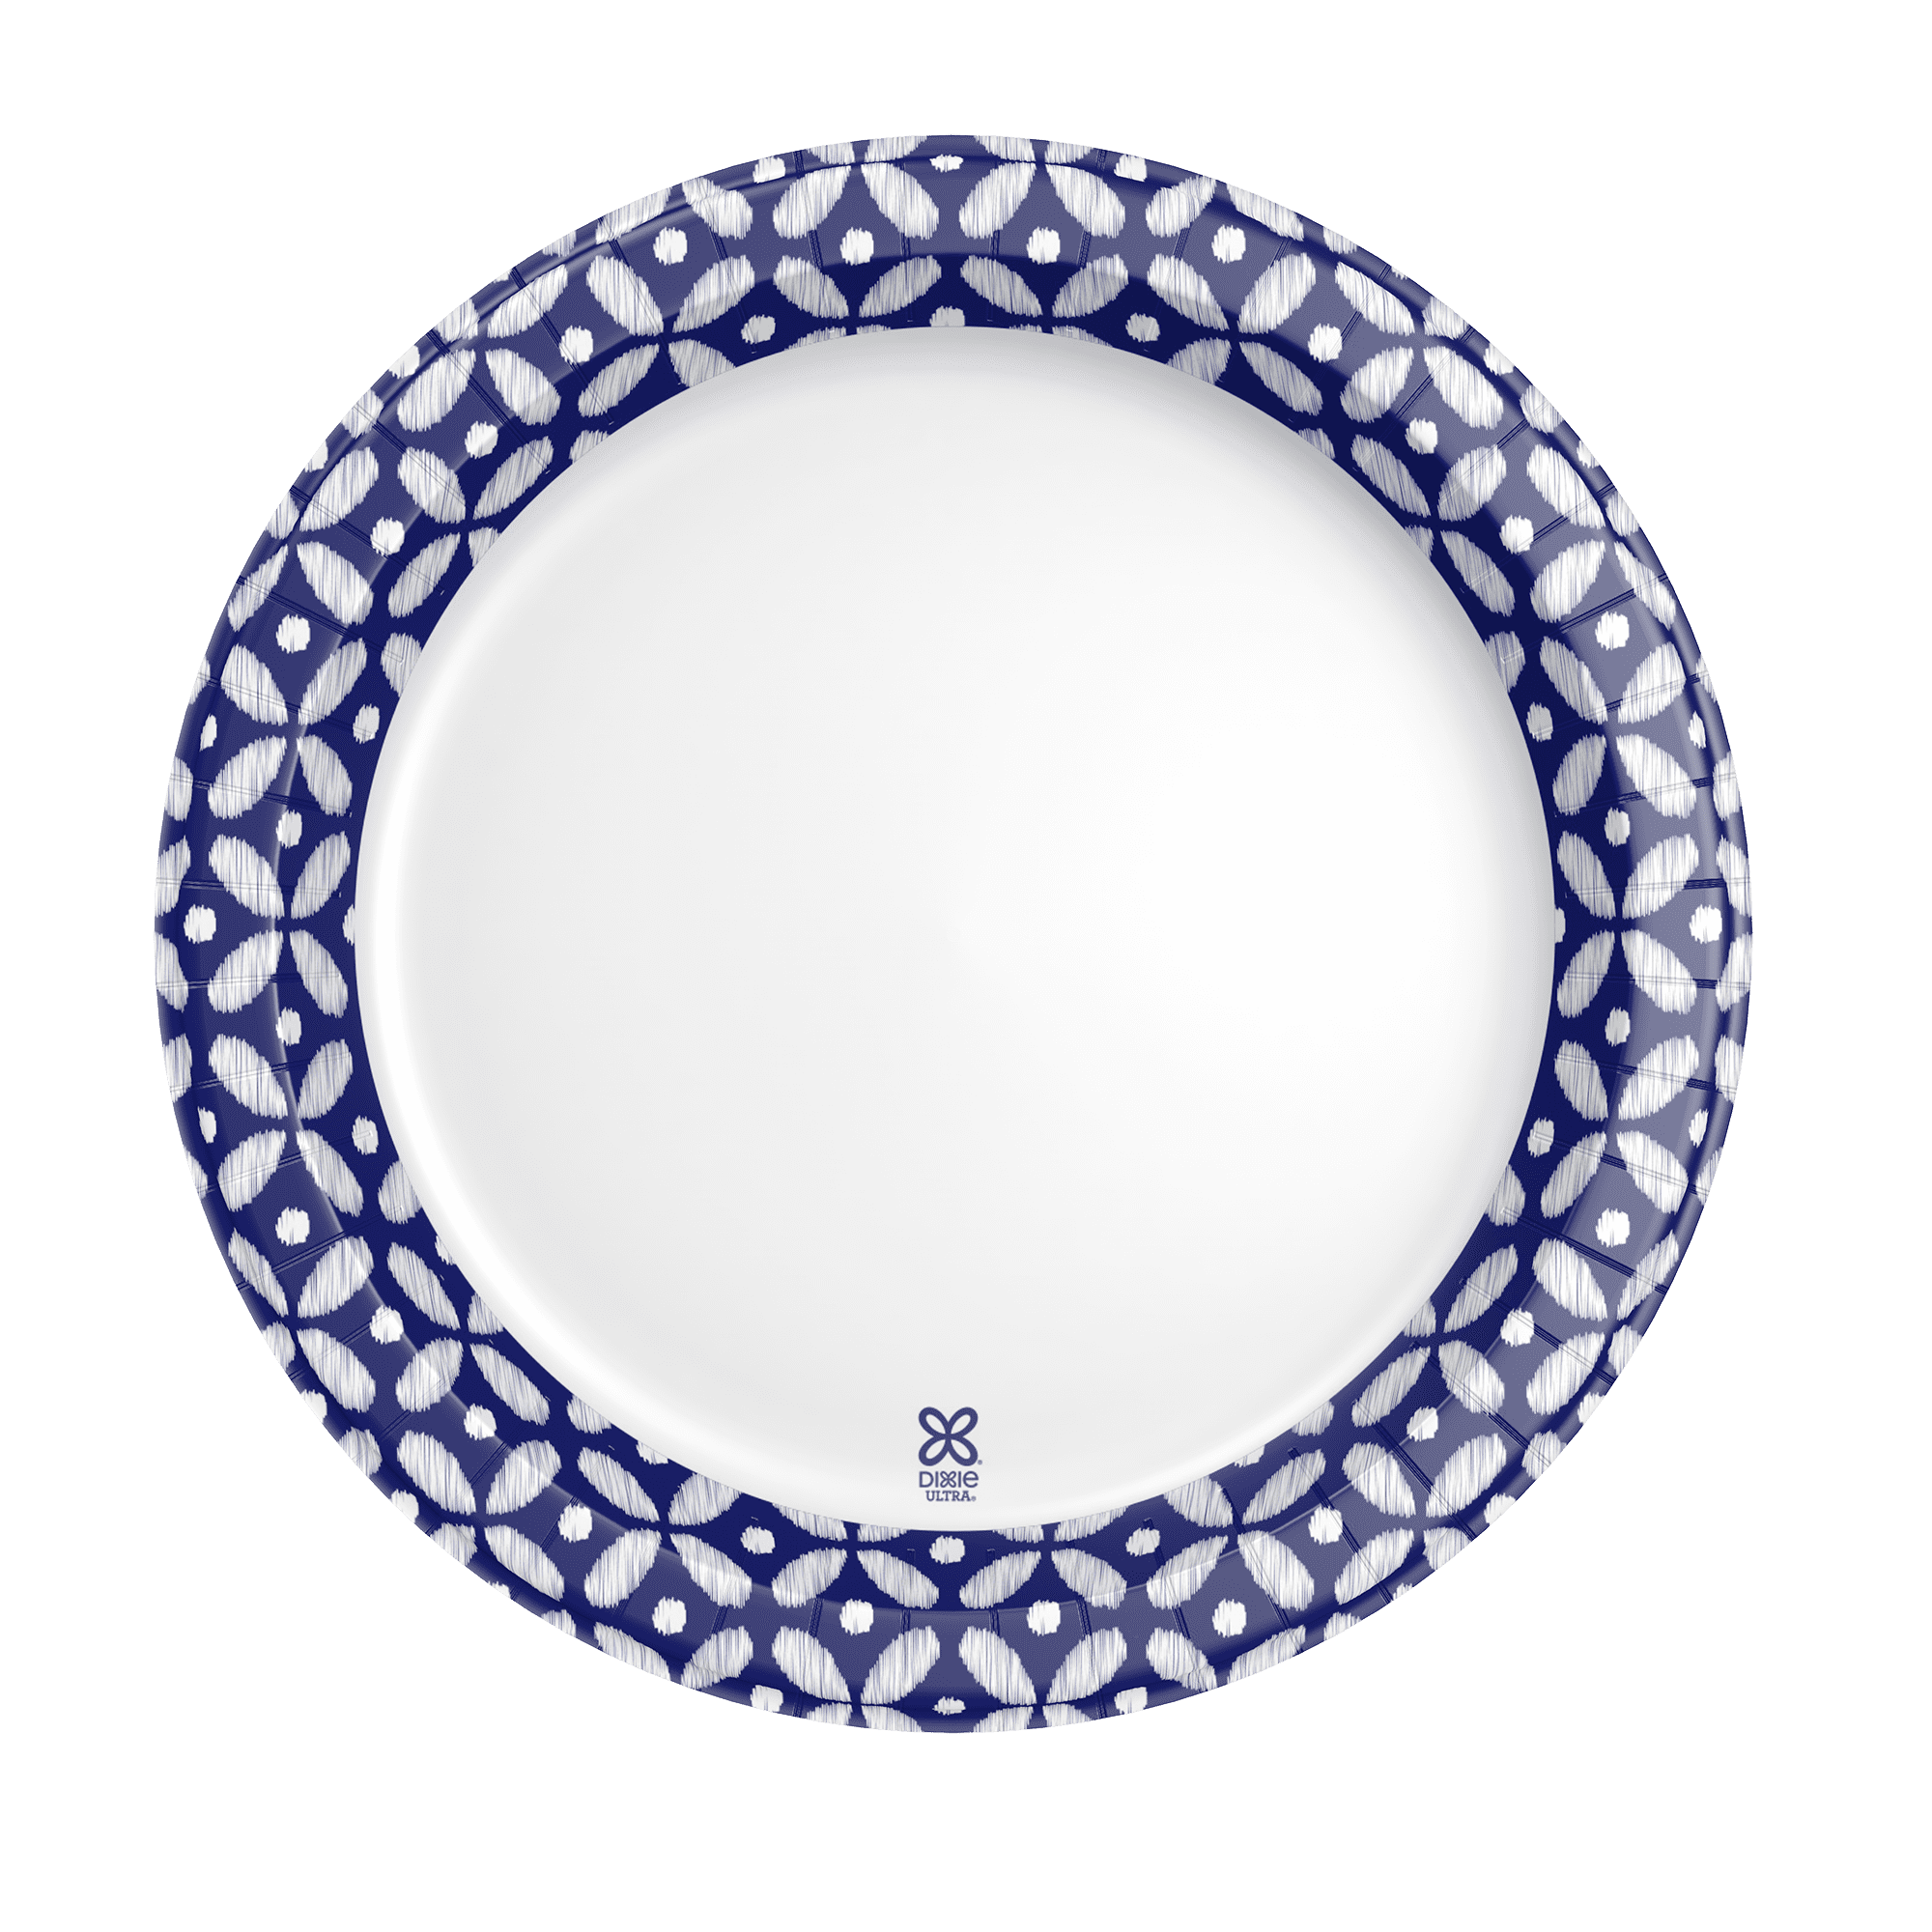 Dixie Ultra® Disposable Large Paper Plates, 11 ½ inch, Dinner Size